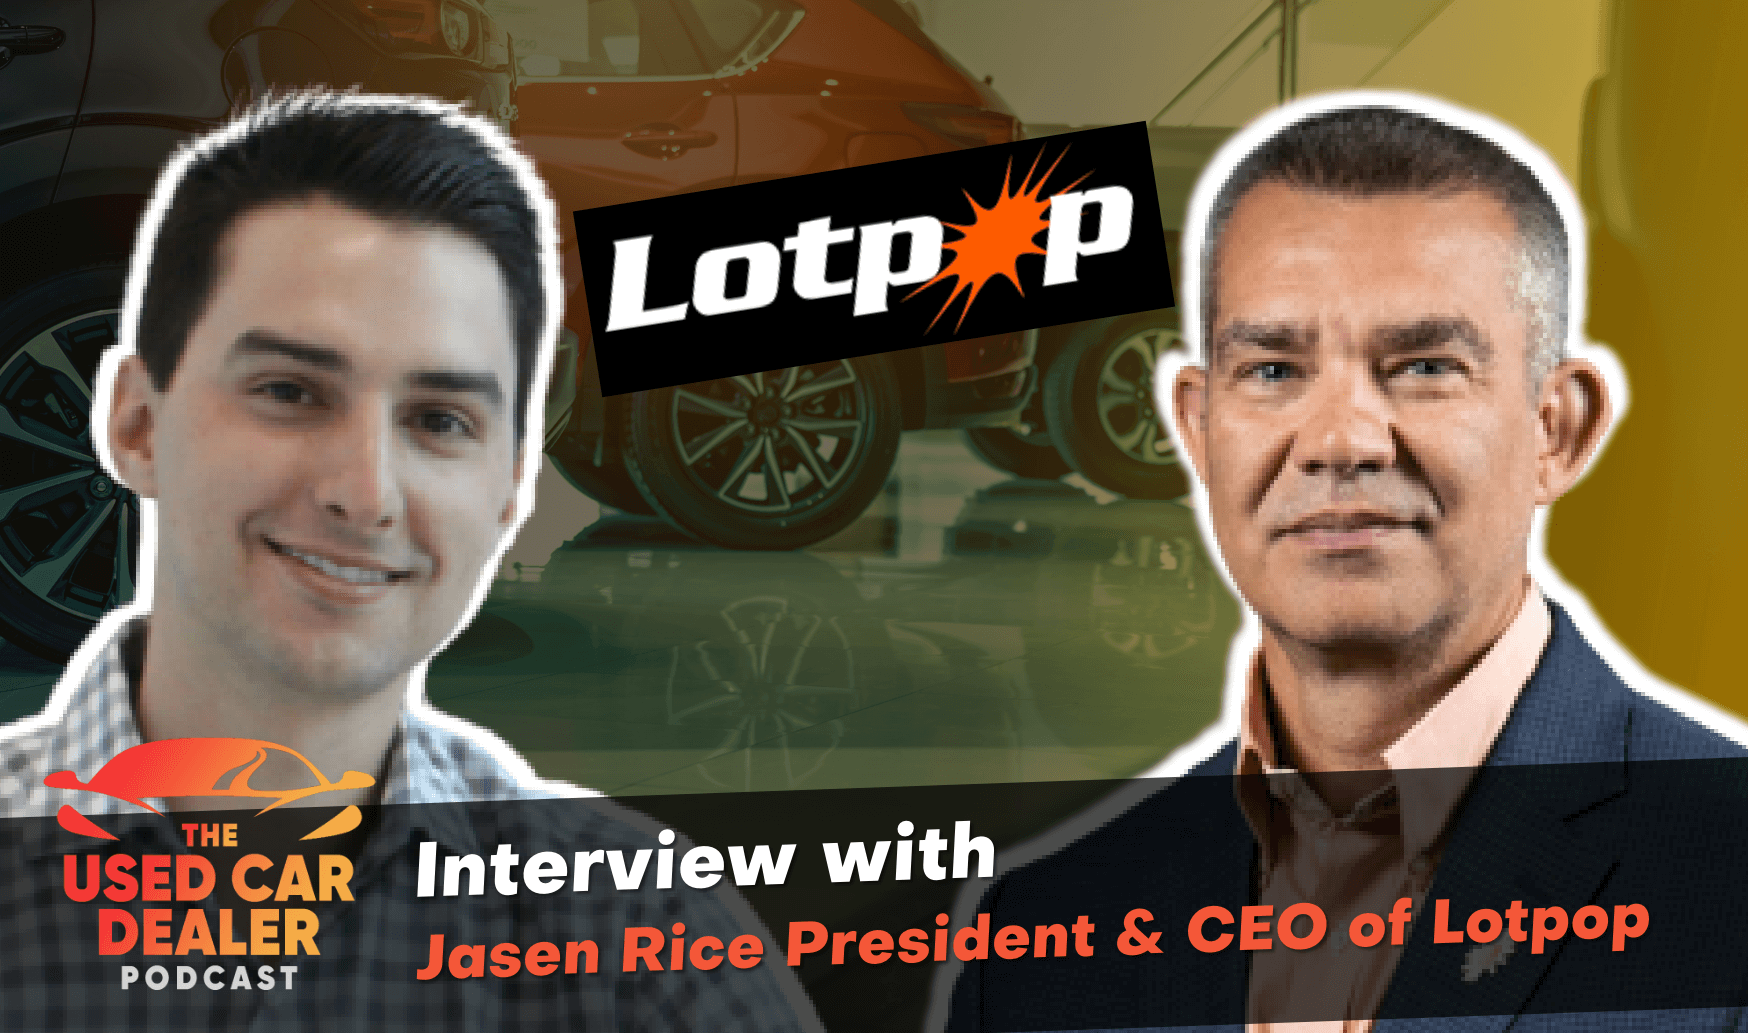 Interview with Jasen Rice President of Lotpop on Inventory and lot management